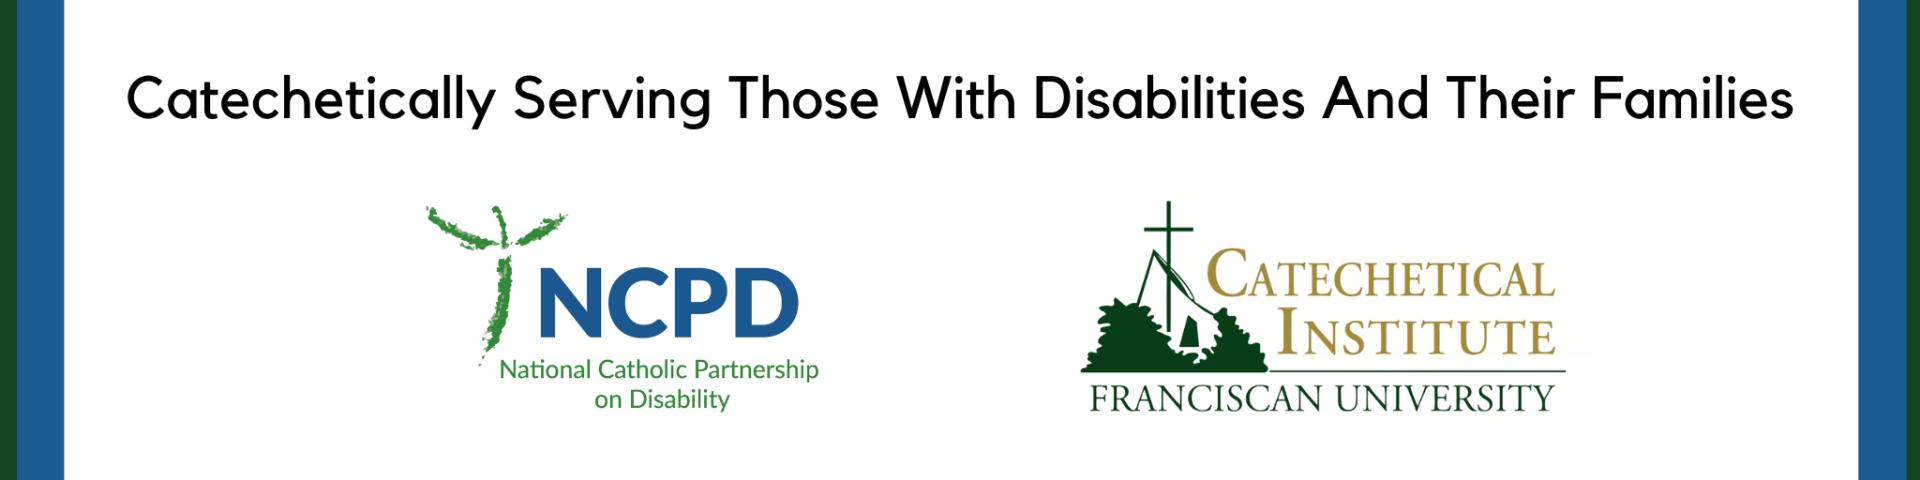 Franciscan University Catechetically Serving Those With Disabilities And Their Families 